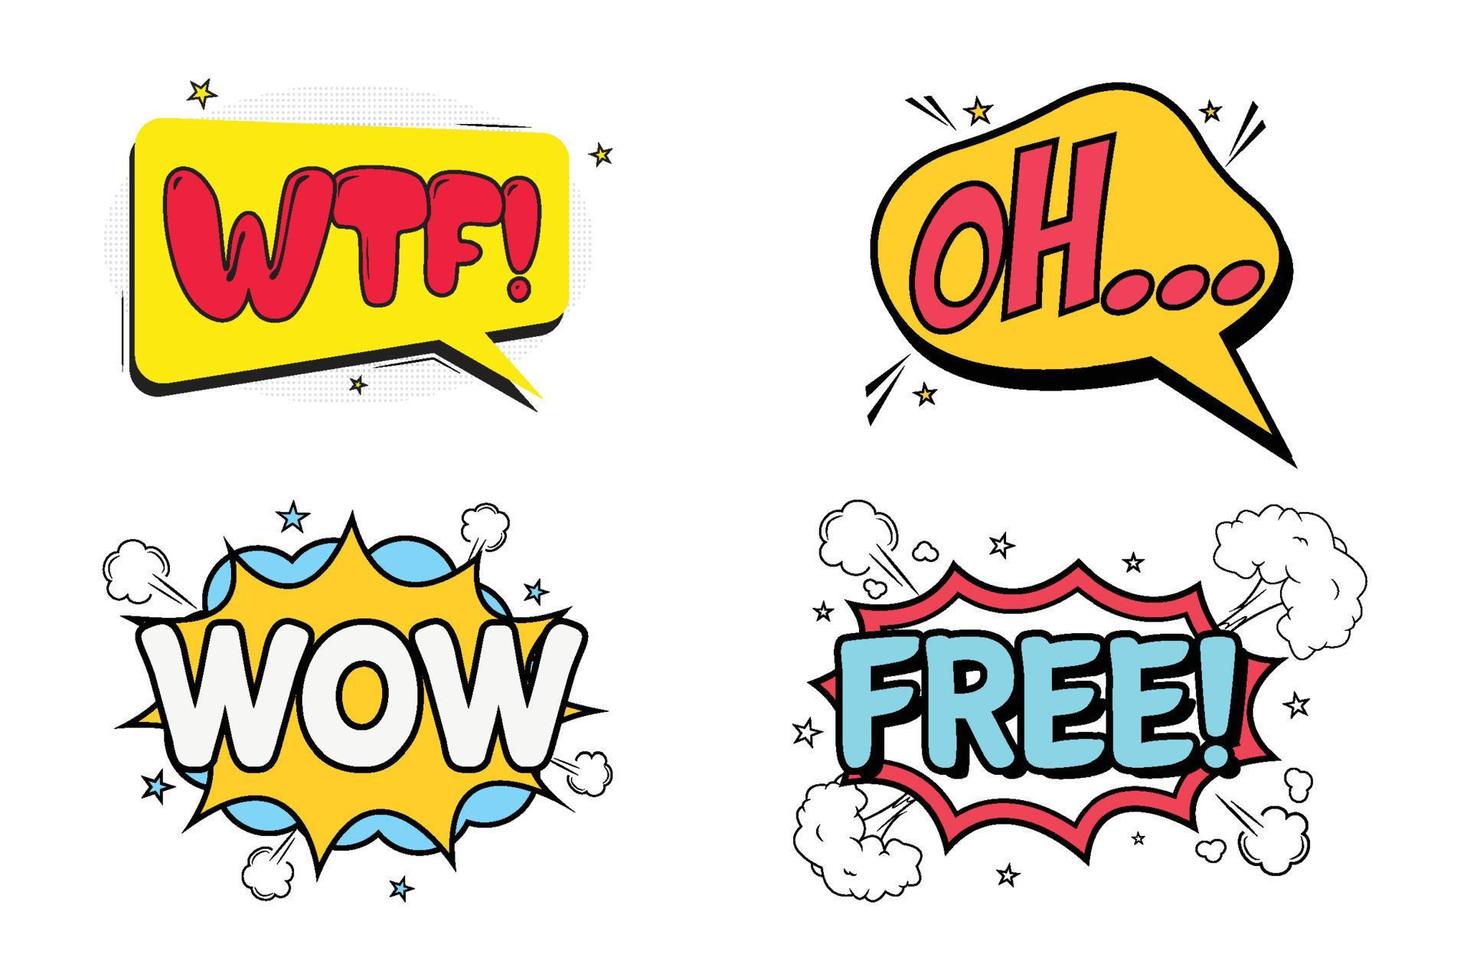 WTF Oh comic explosion with red and yellow colors. Wow Free comic burst with yellow, white, blue, and red colors. Comic explosion collection. Comic burst text bubbles set vector. vector